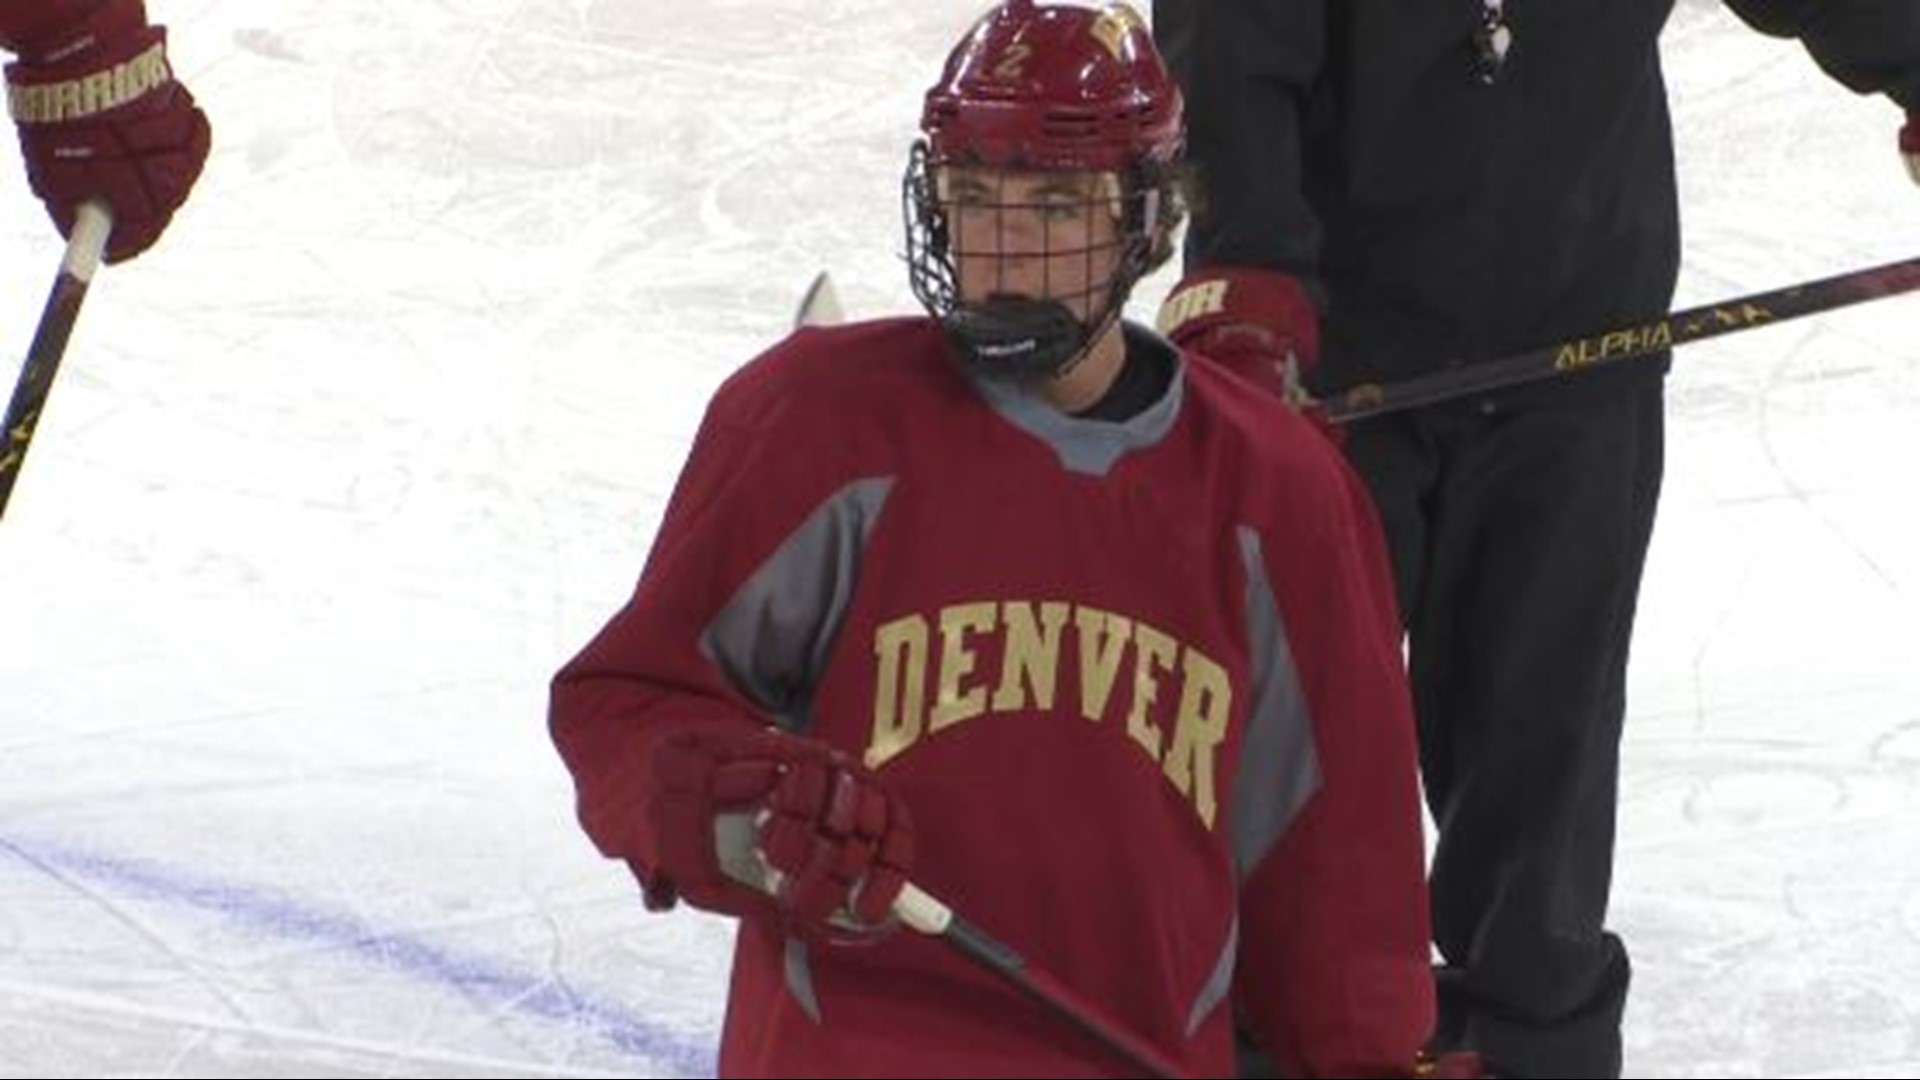 Sean Behrens was selected 61st overall in the 2021 NHL Draft by the Colorado Avalanche, and the freshman defender was already previously committed to move to Denver.